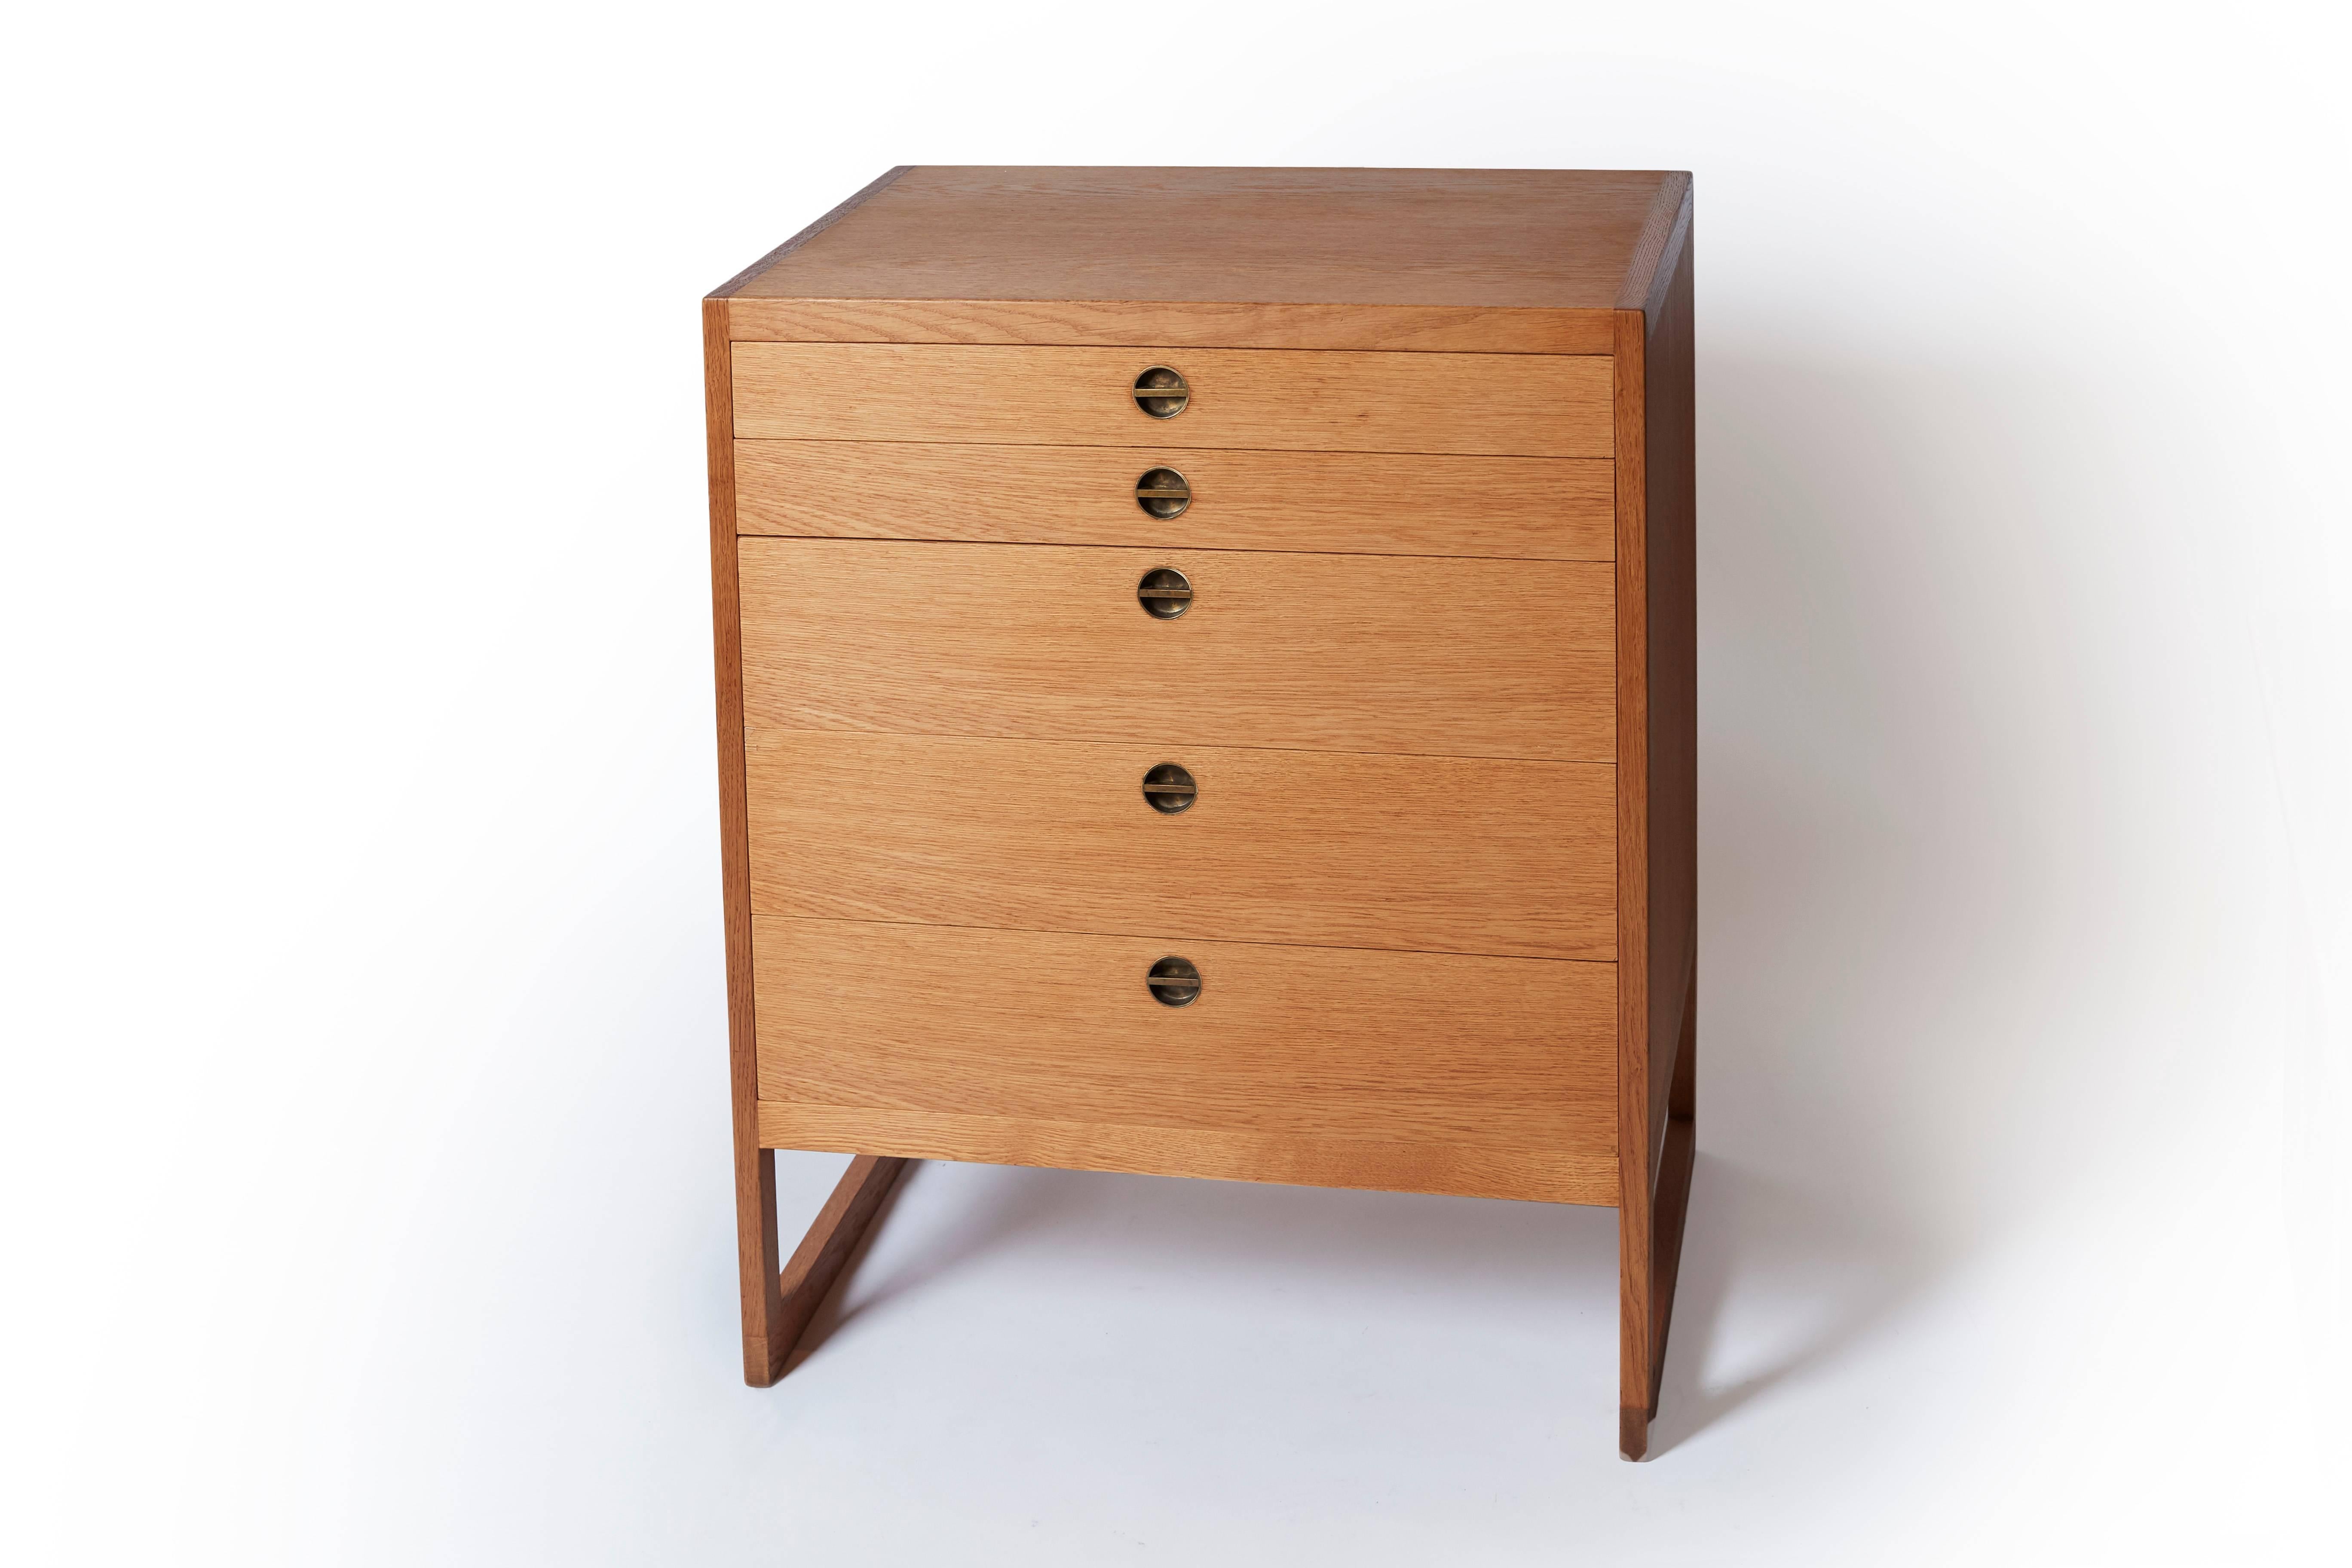 A five-drawer cabinet in oak, decorated with circular brass handles. Model BM 59, edited by P. Lauritzen & Sons.
Danish work by designer Borge Mogensen, circa 1957.